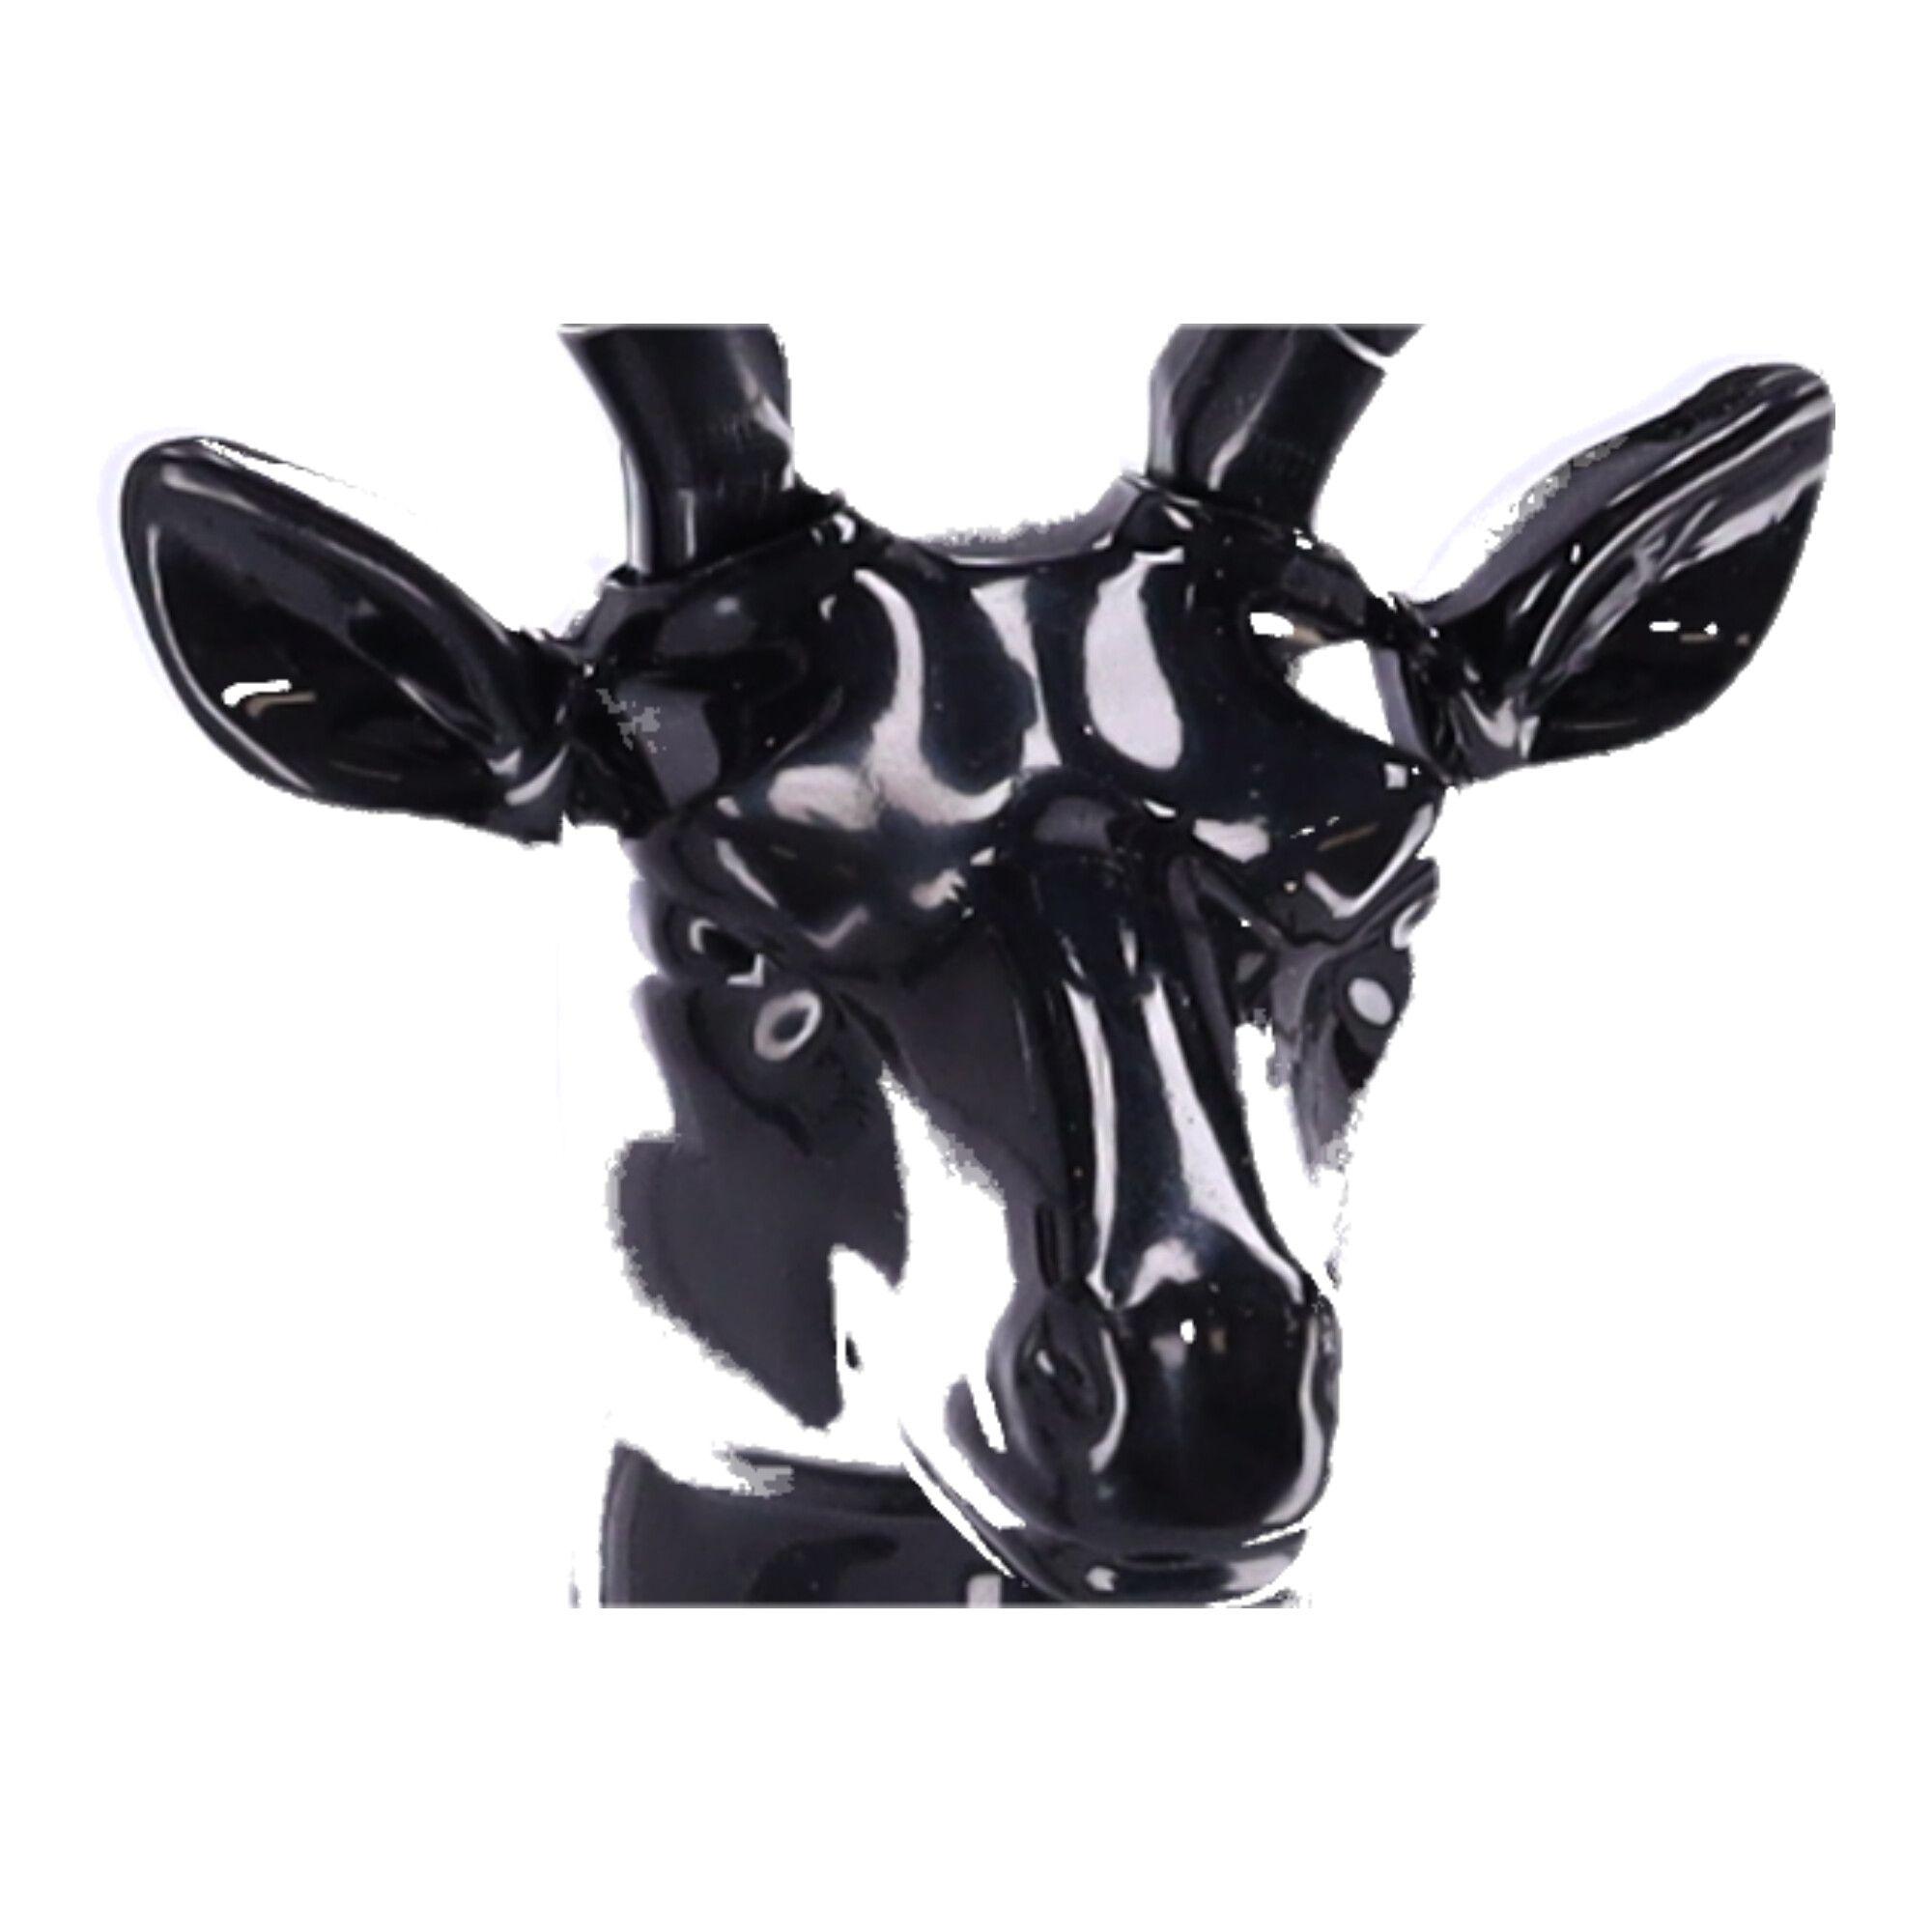 Wall hook made of antler in the form of a sticker - black